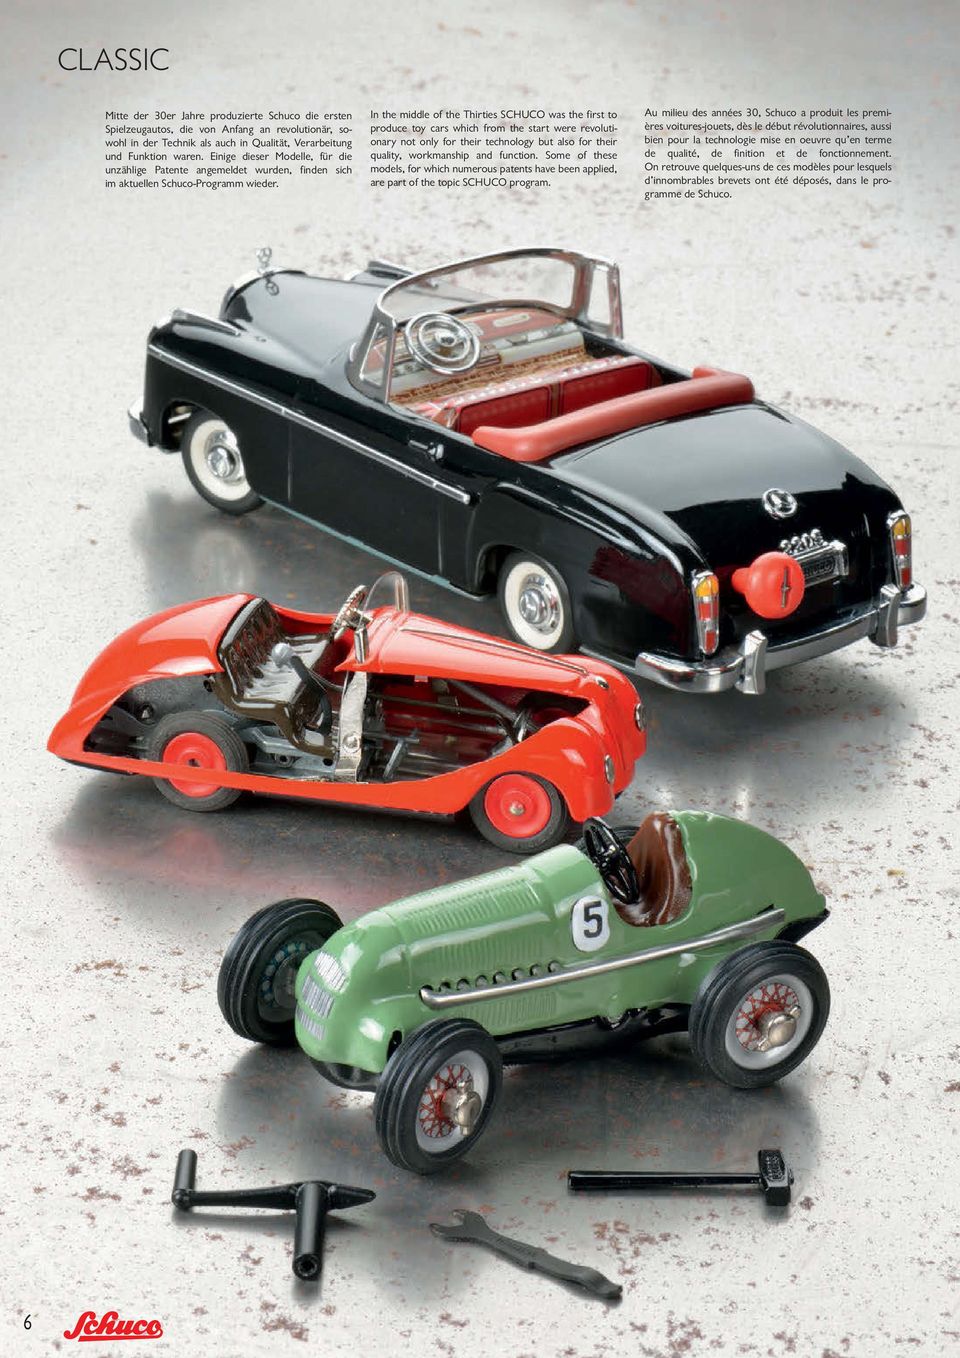 In the middle of the Thirties SCHUCO was the first to produce toy cars which from the start were revolutionary not only for their technology but also for their quality, workmanship and function.